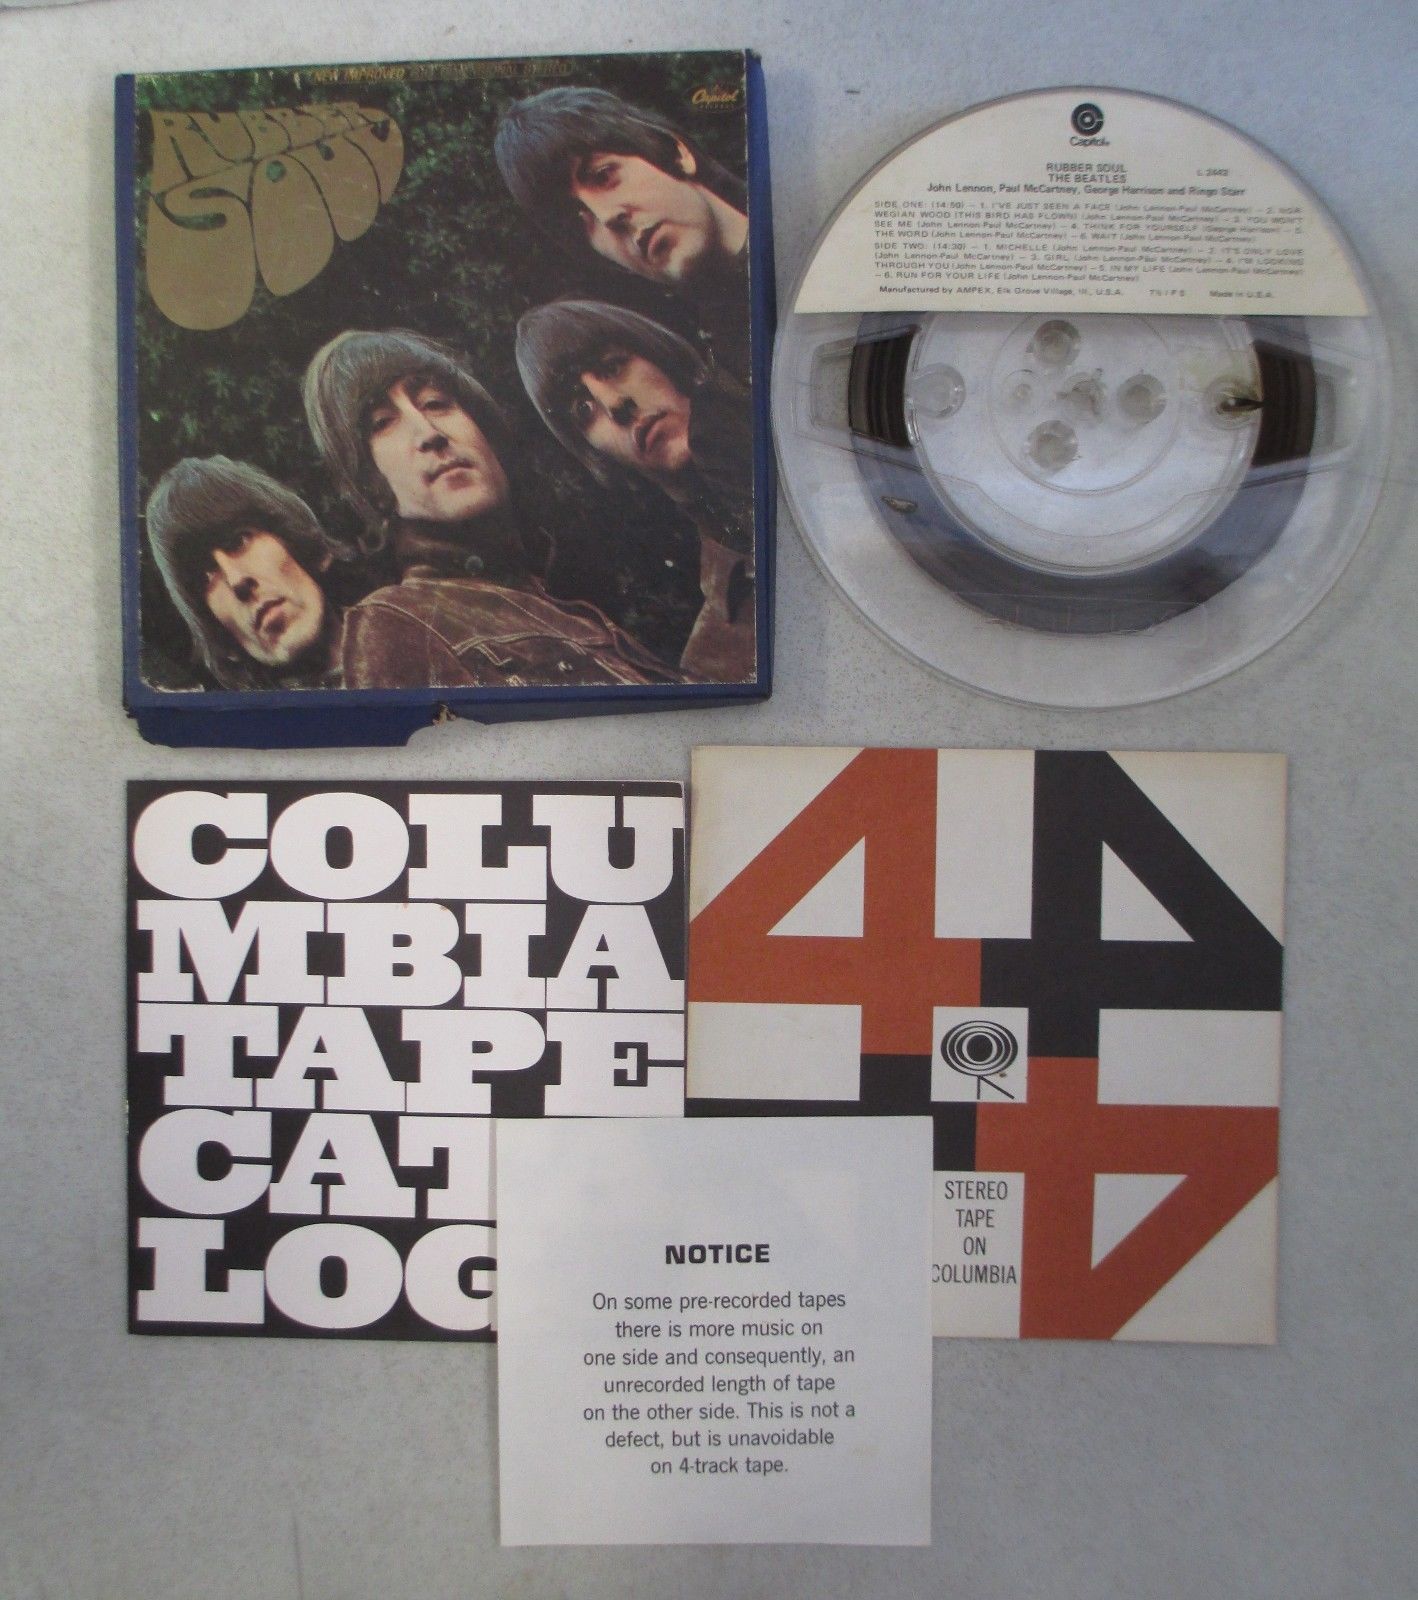  AMPEX THE BEATLES - RUBBER SOUL 4 TRACK REEL TO REEL TAPE 7  1/2 IPS CAPITOL 2442 - auction details